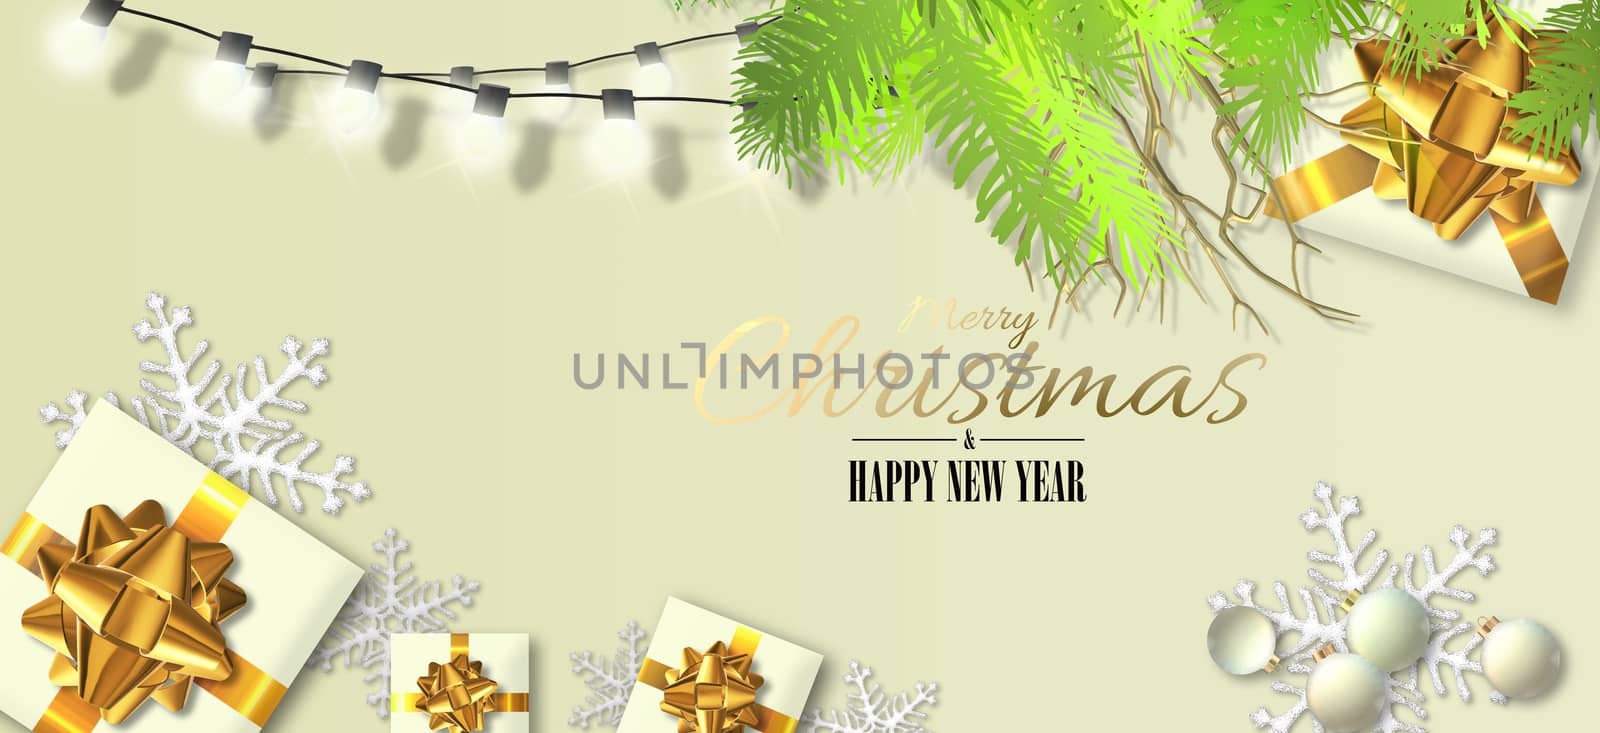 Christmas New Year holiday design. Xmas gold gift boxes, golden bows Xmas fir, snowflakes, gold text Merry Christmas Happy New Year over pastel yellow. Horizontal realistic 3D illustration